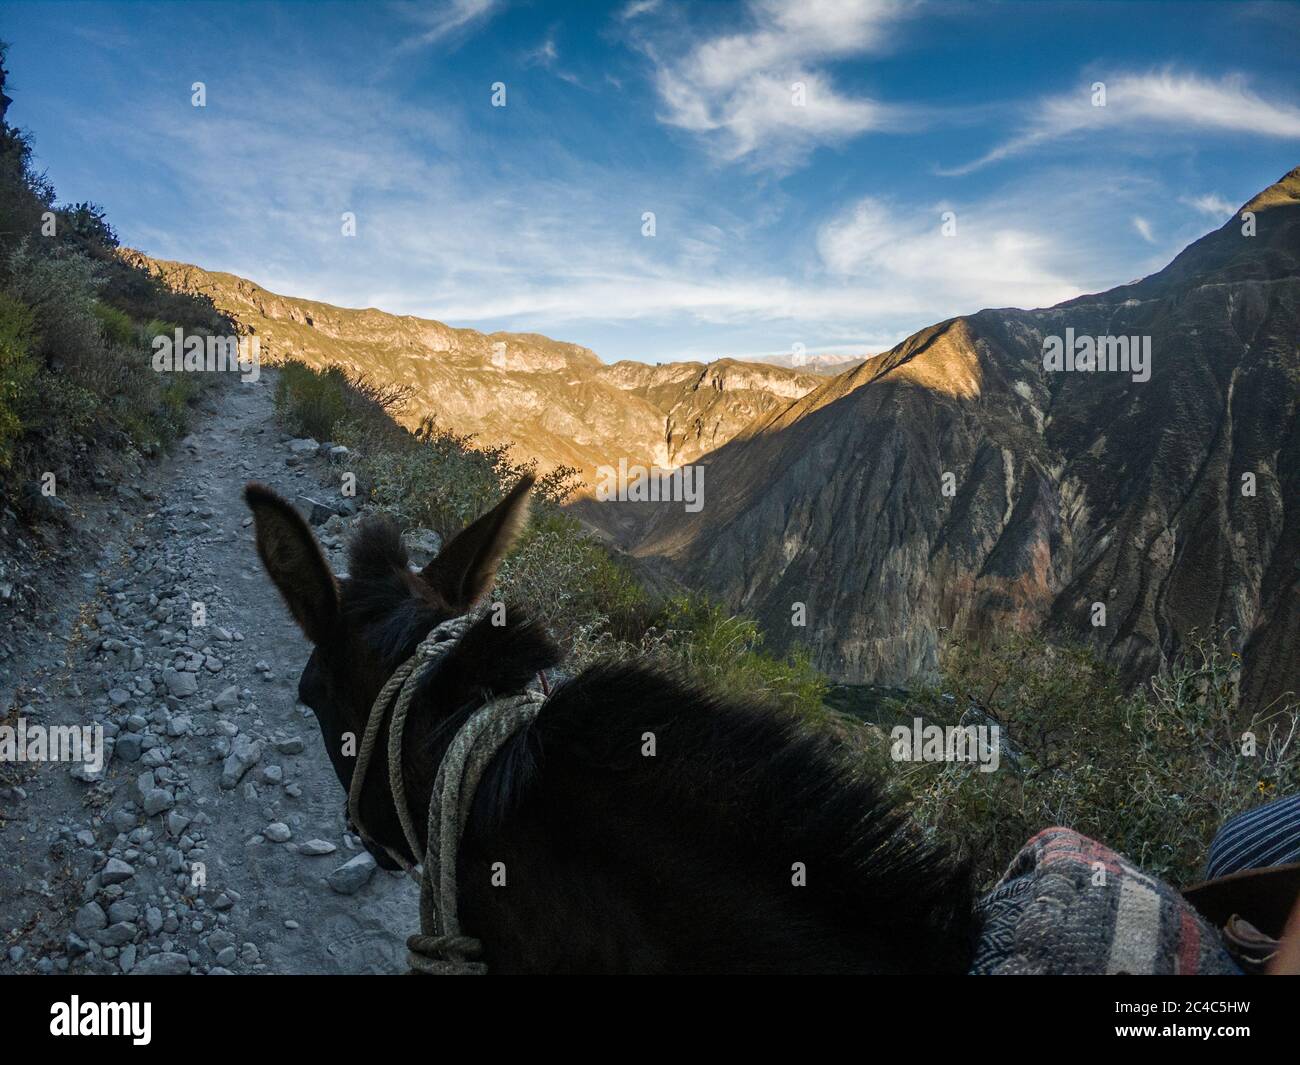 horseback in a path in the middle of a mountain and blue sky Stock Photo